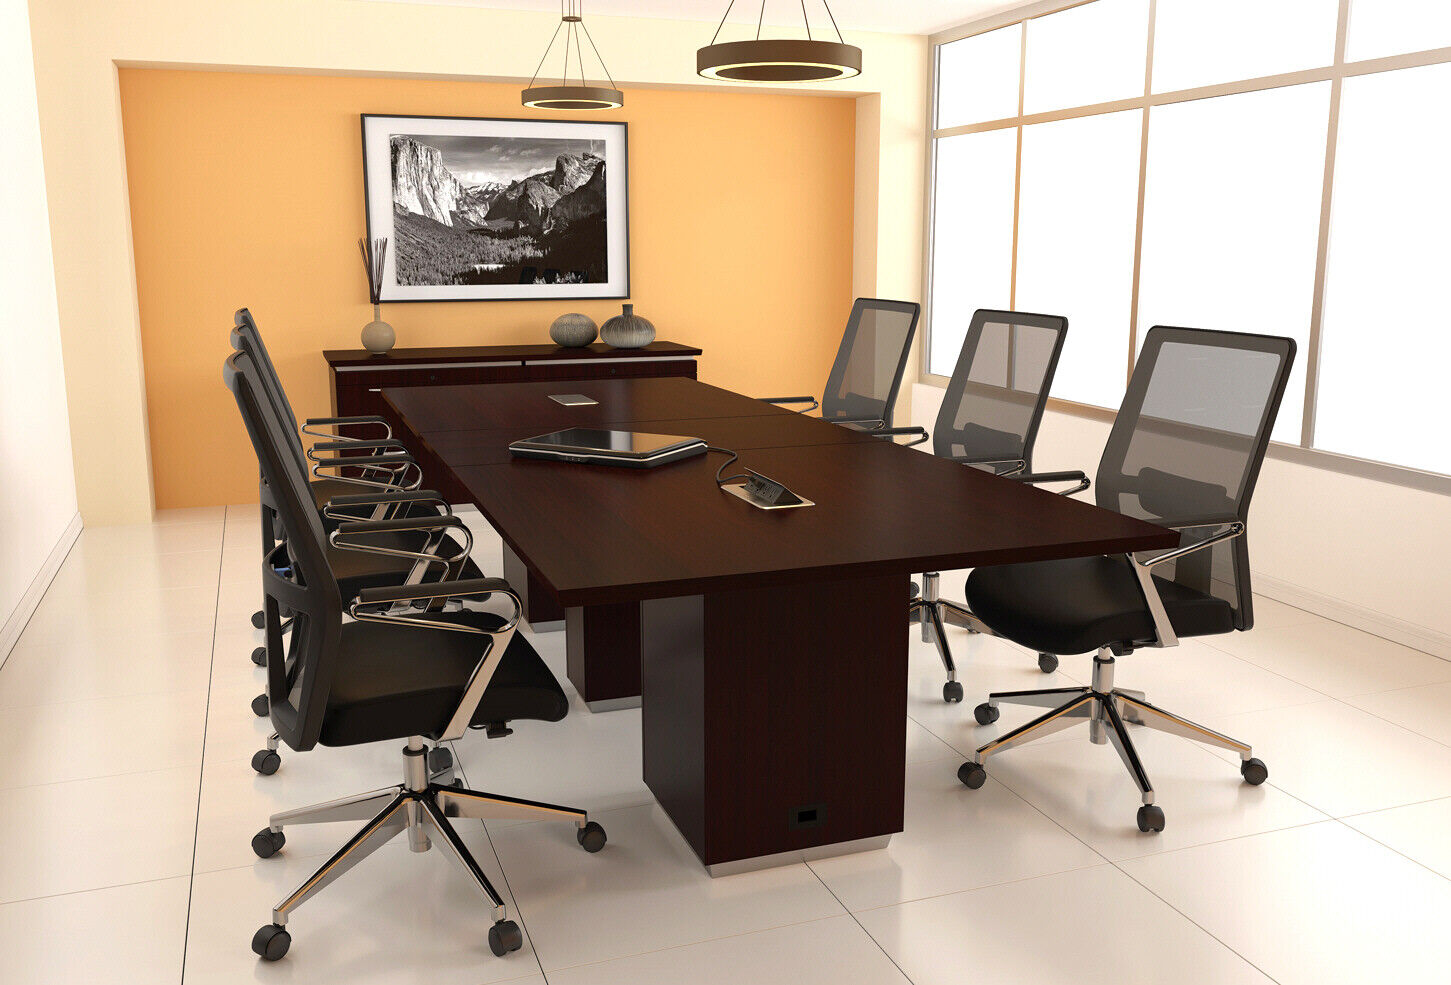 20 ft Modern Conference Table with 5 Power and Data Ports has 10 Outlets 10 USB